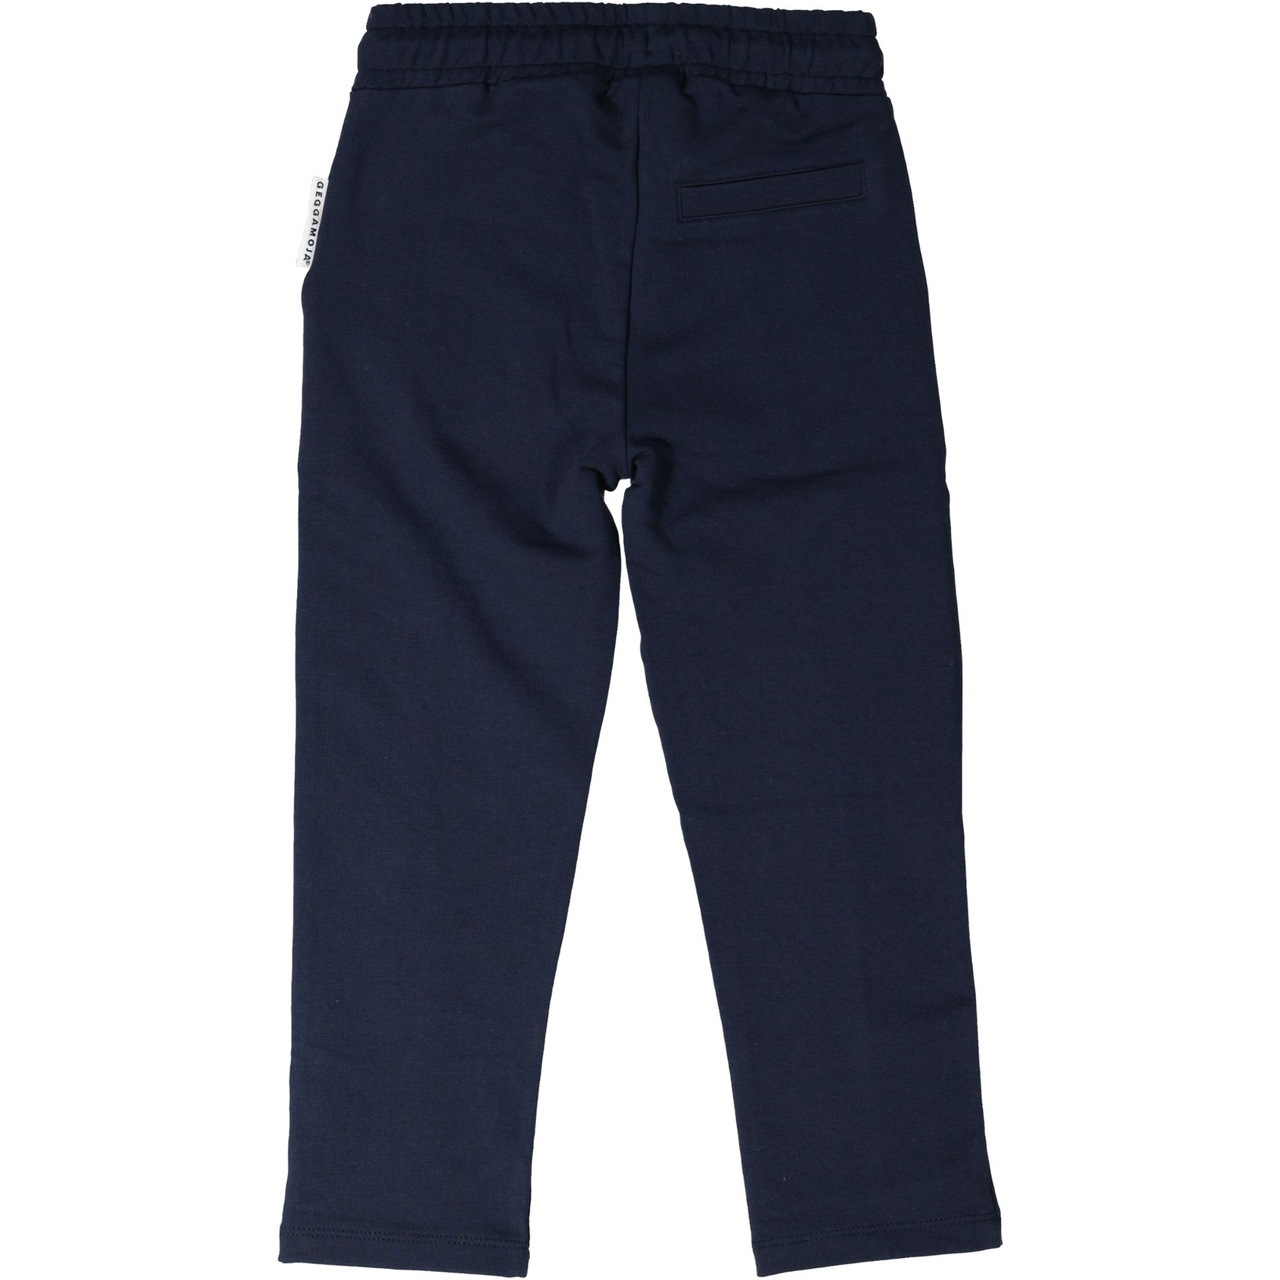 College trousers Navy  134/140